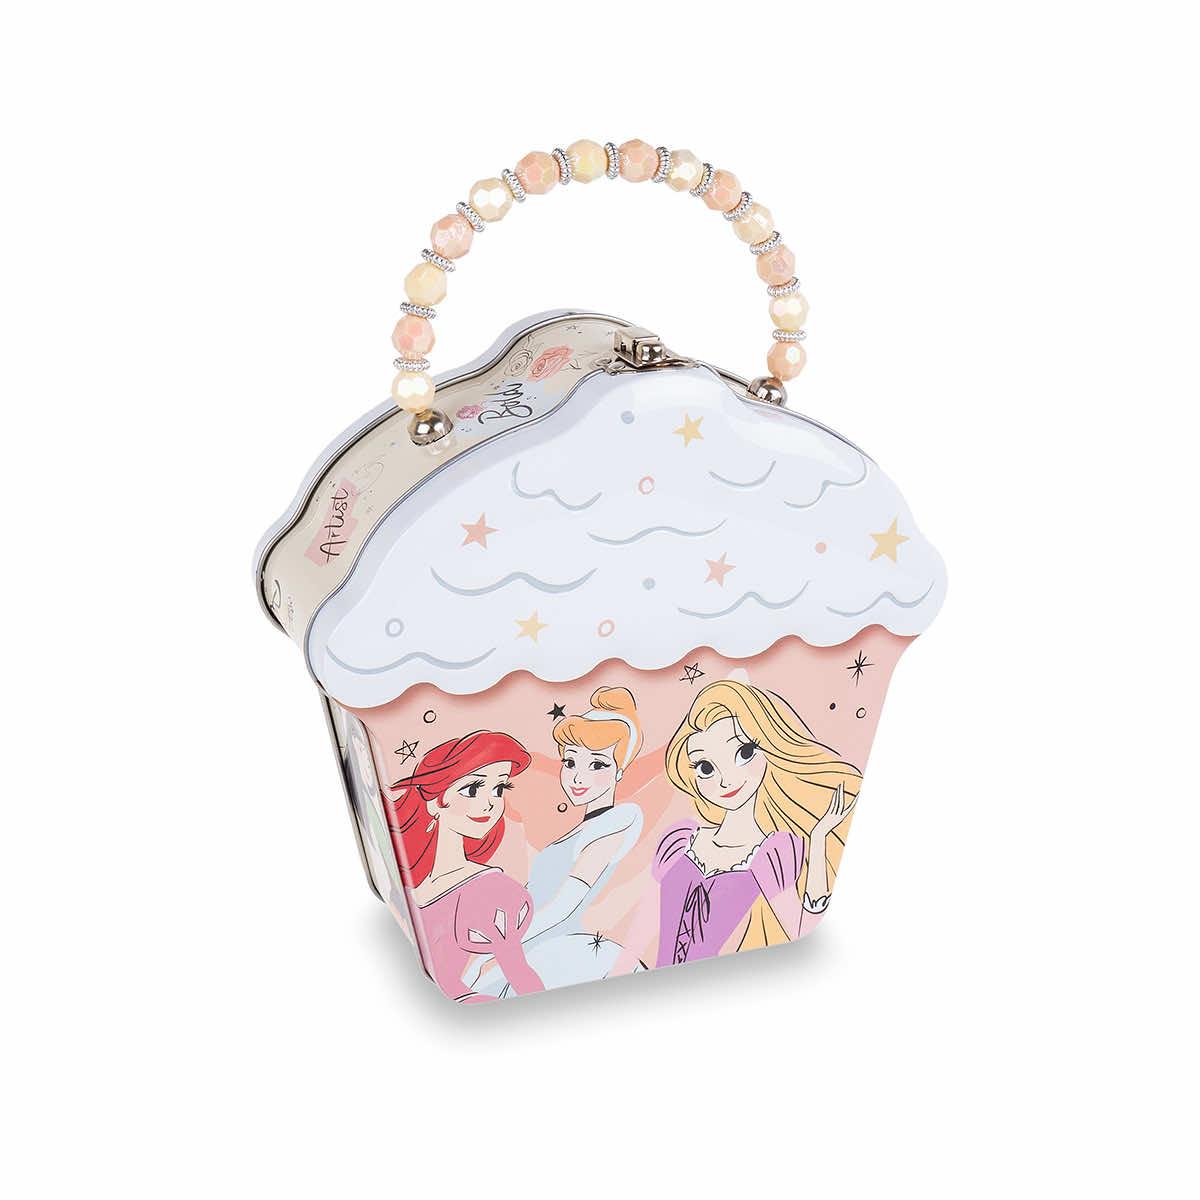 Disney Princess Lunch Box Back to School Lunch Box for Girls With Bonus  Crown for sale online